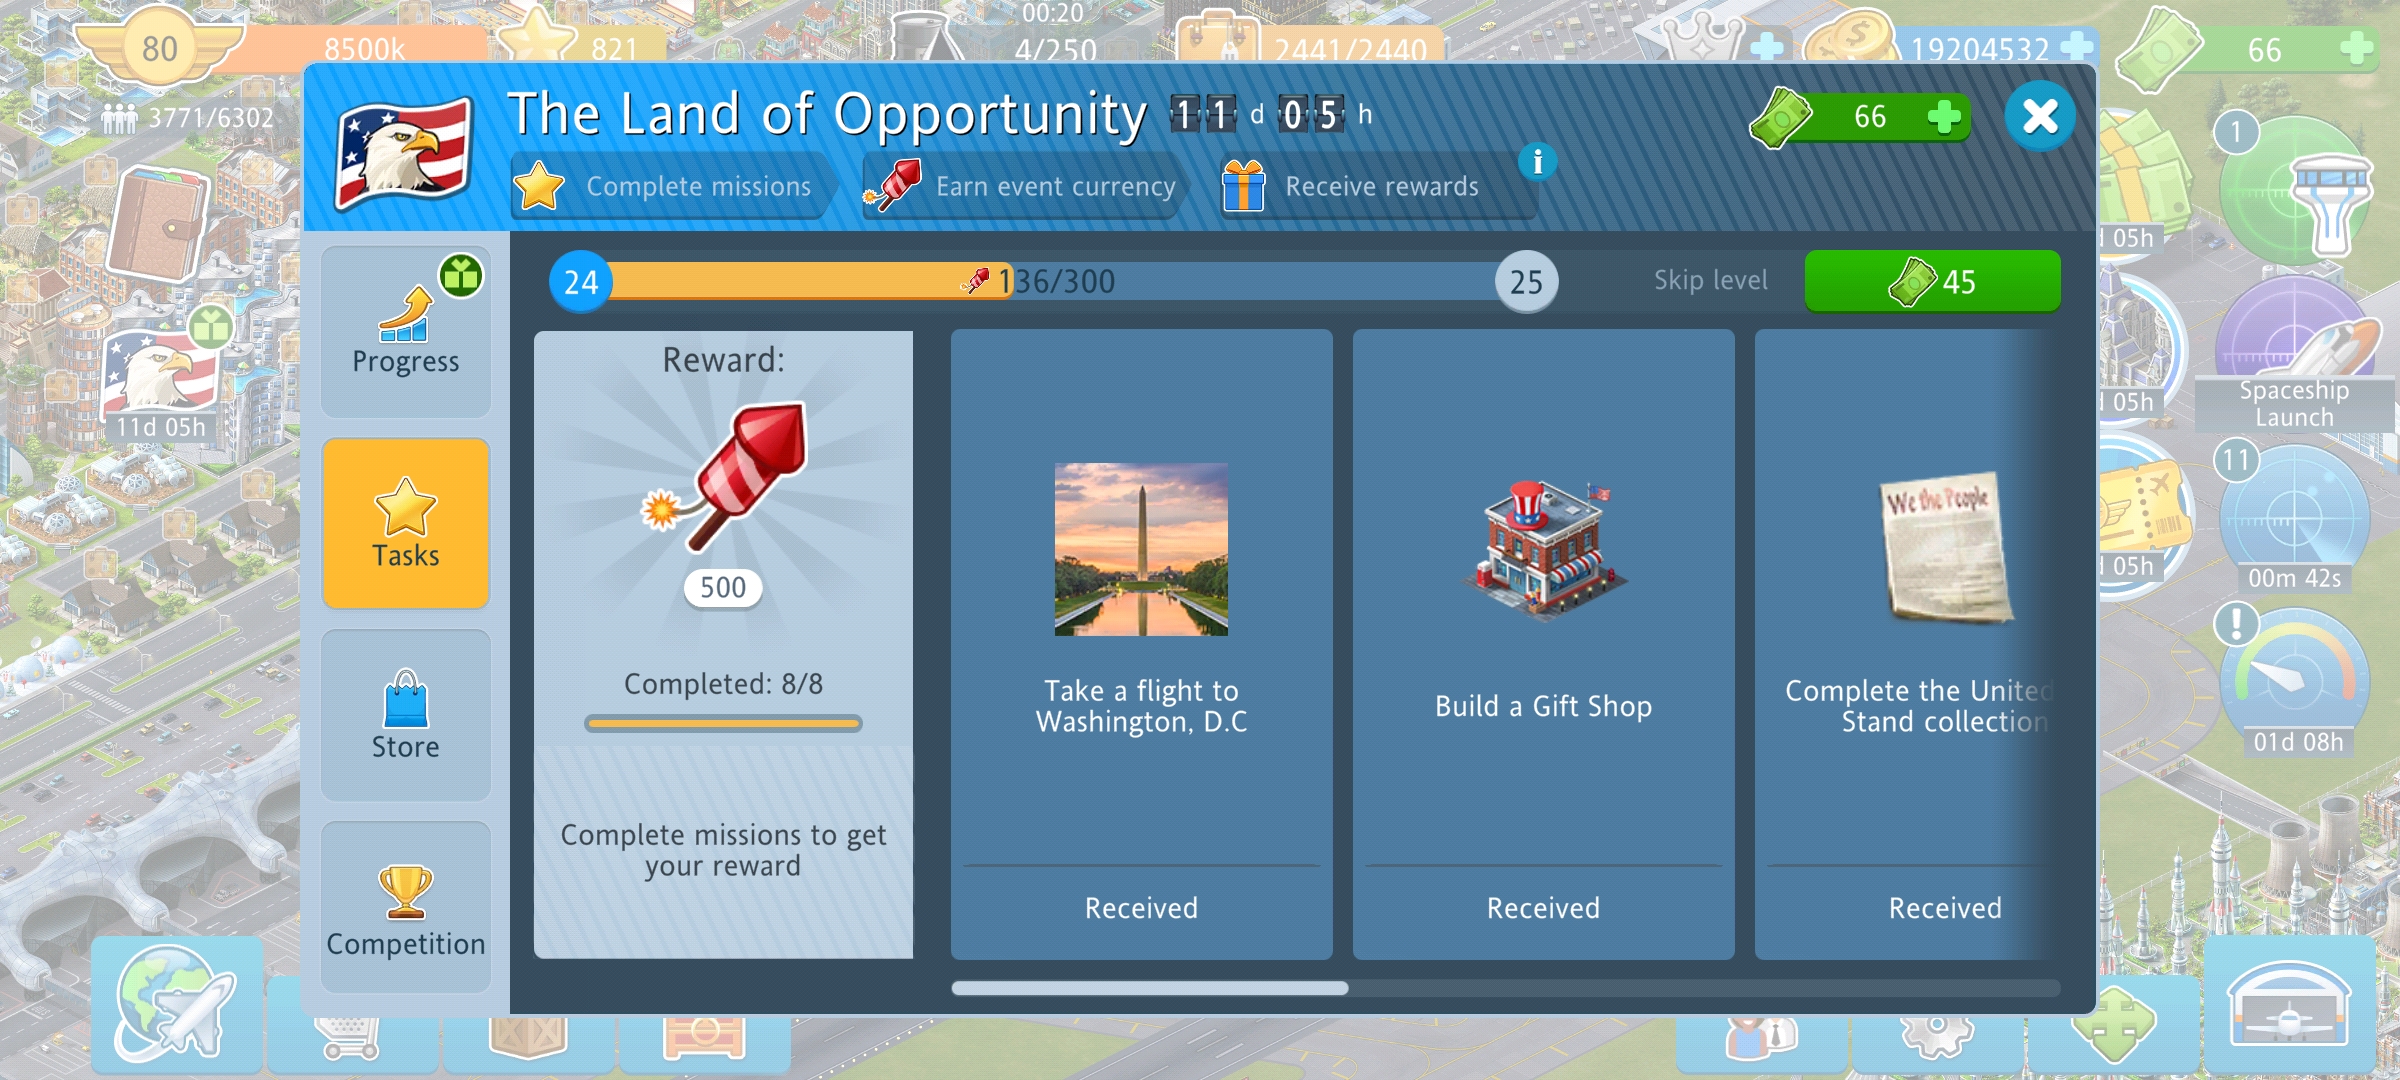 The land of opportunity 2021.jpg